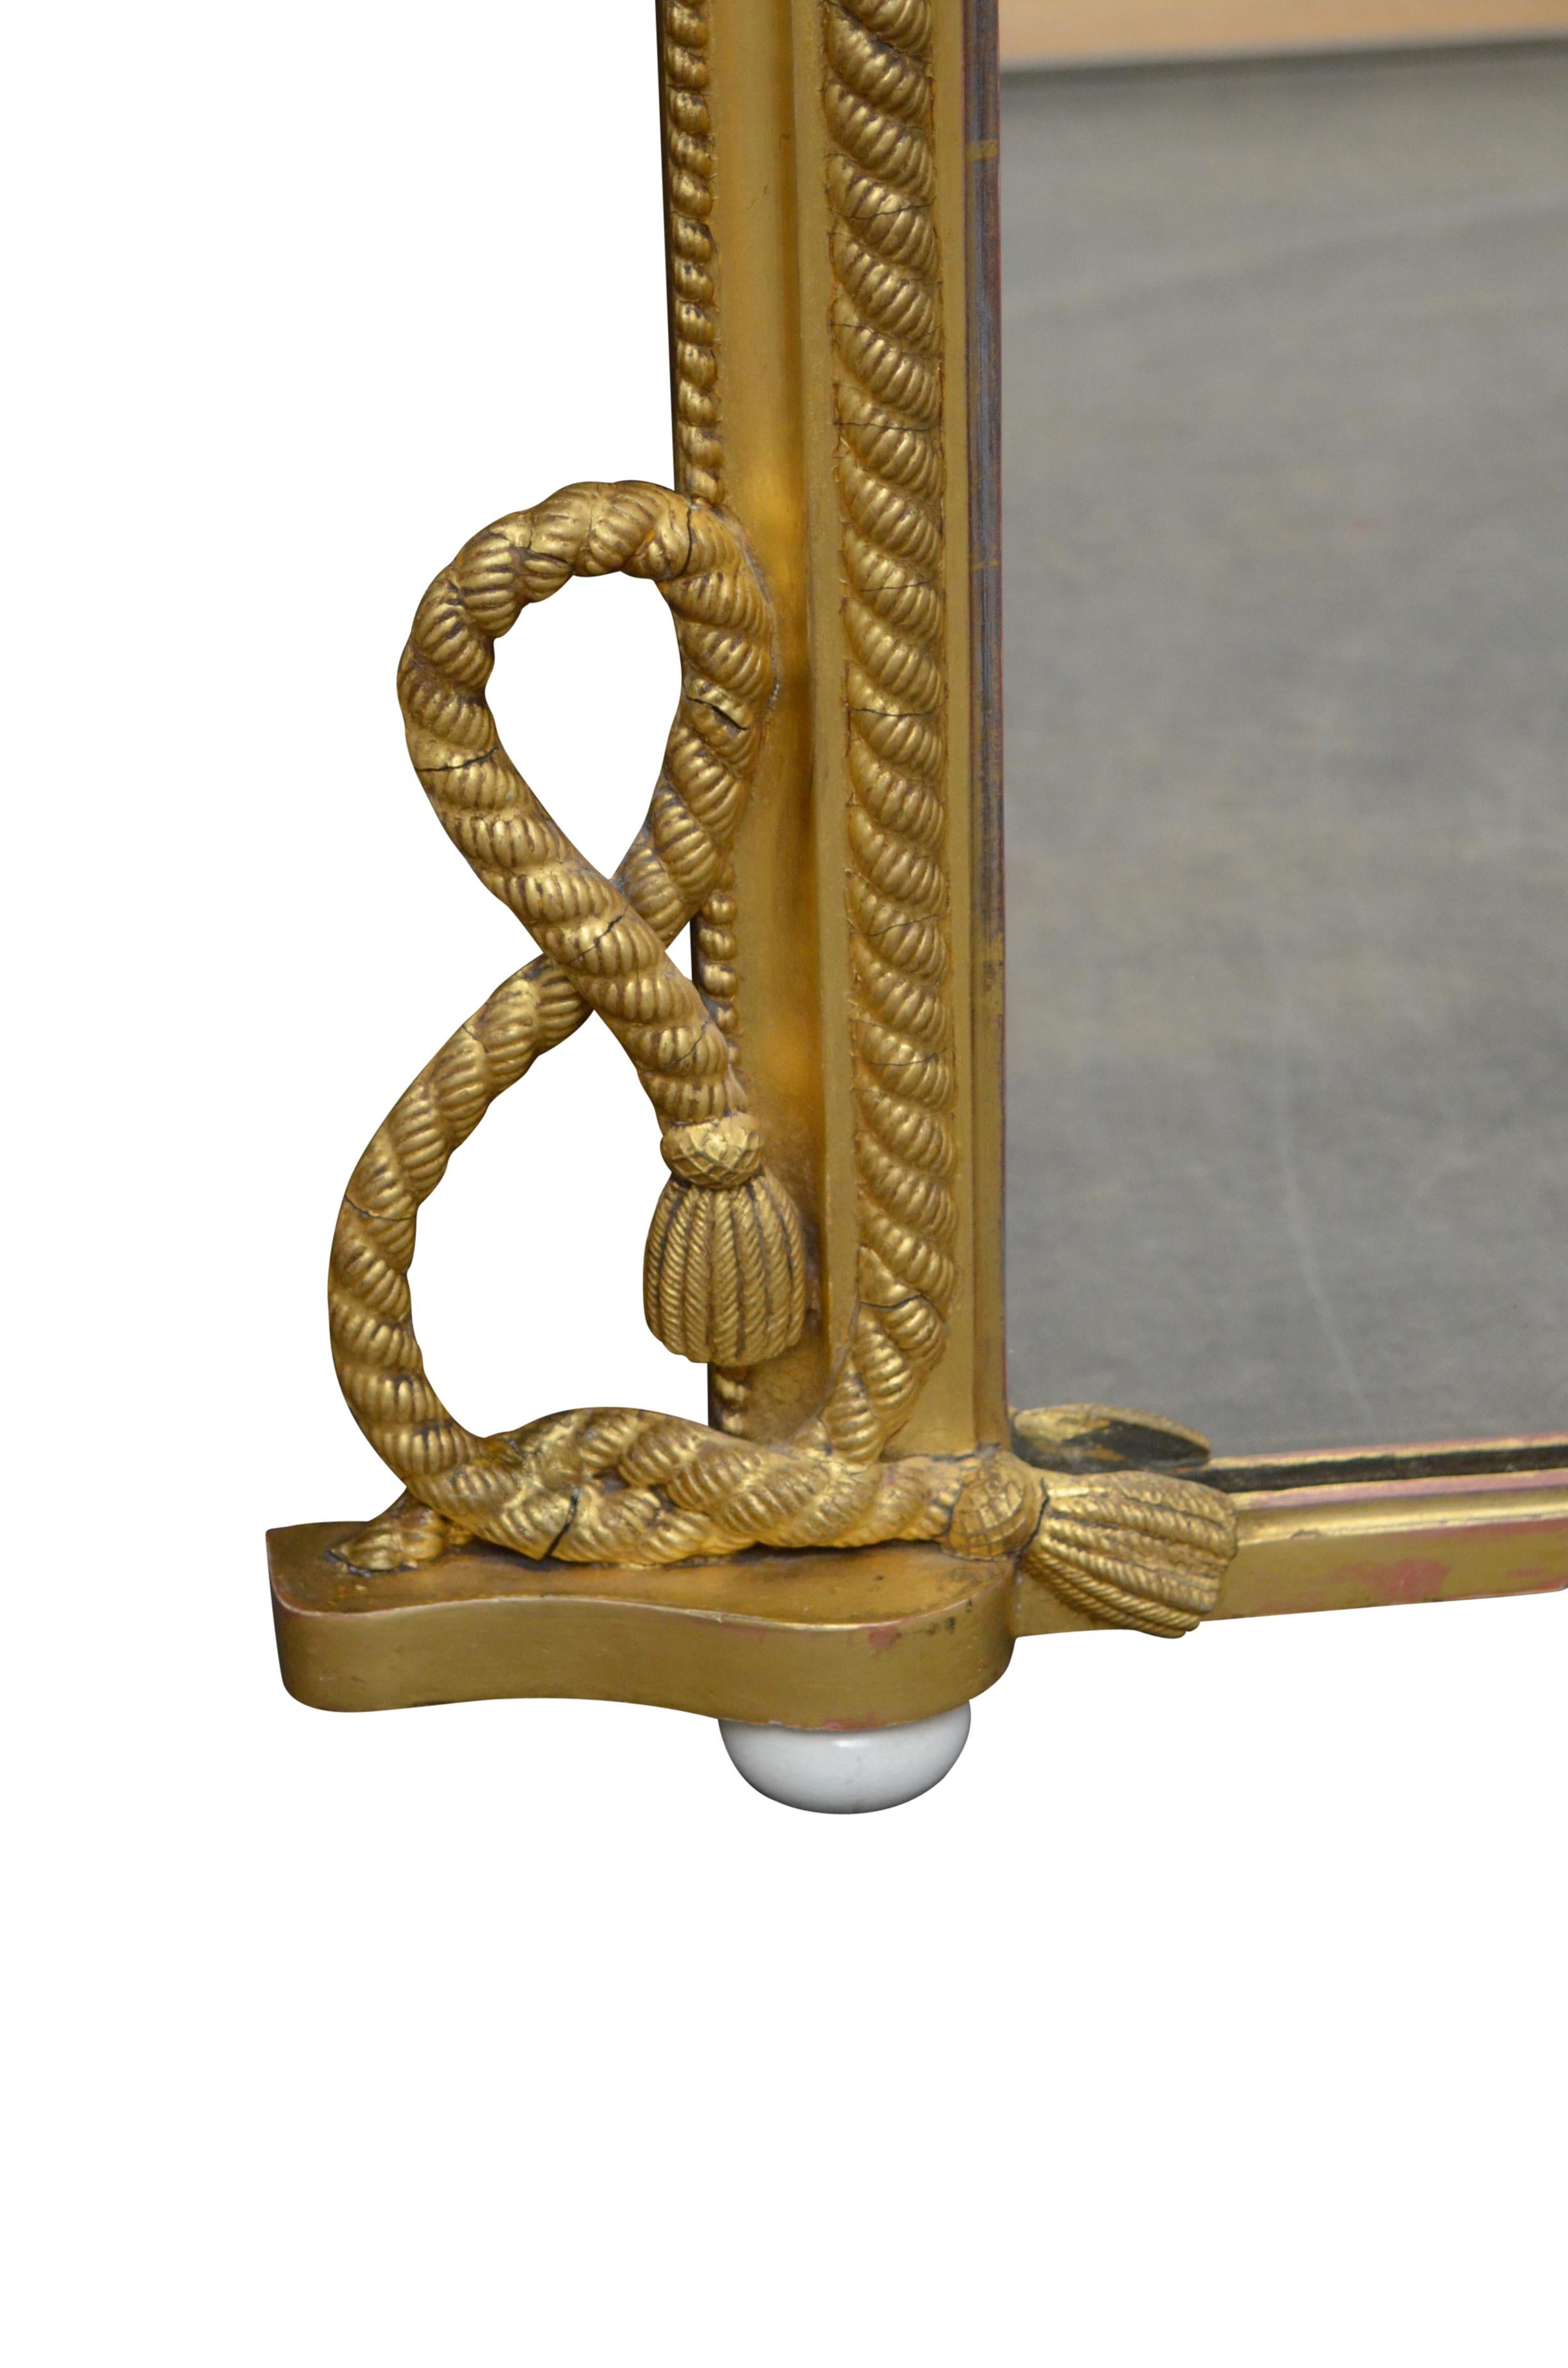 K0507 attractive Victorian gilt wall mirror, having original glass with some imperfections in finely carved frame with rope motif, rope crest with tassels and rope scrolls with carved tassels, all standing on removable porcelain feet. This antique